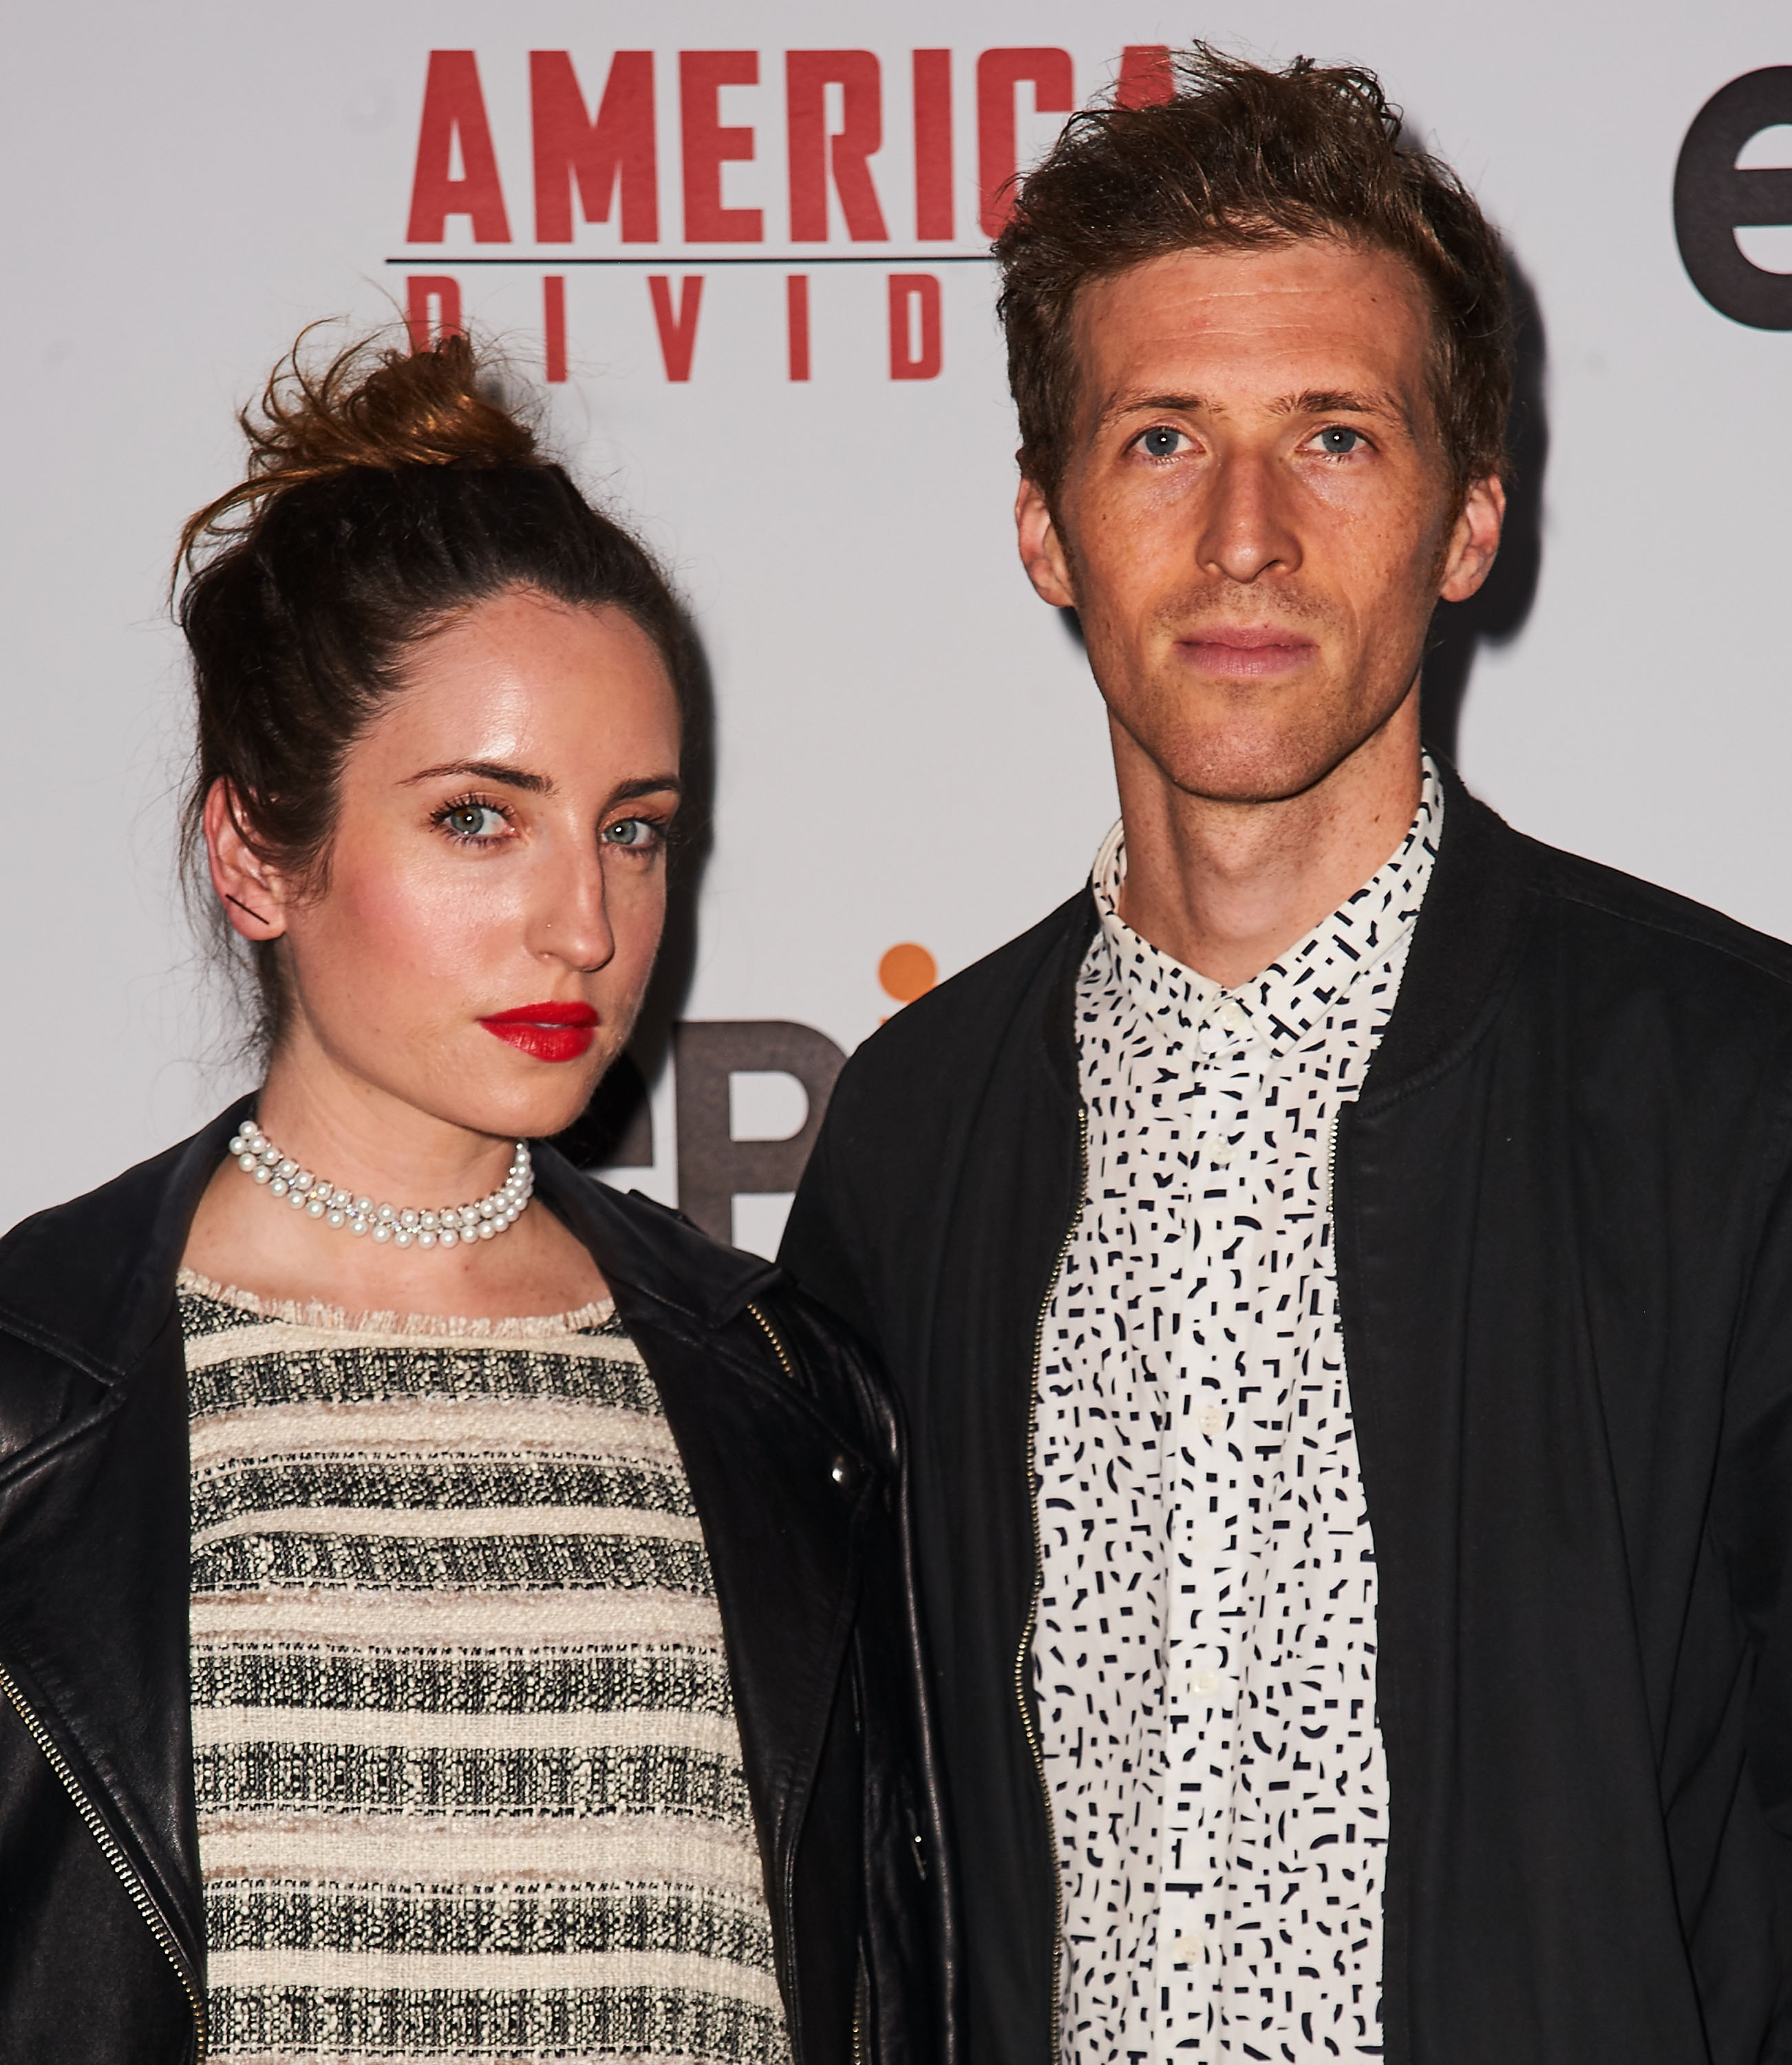 Zoe Lister Jones and Daryl Wein at the Premiere of "America Divided" on September 20, 2016, in California | Source: Getty Images